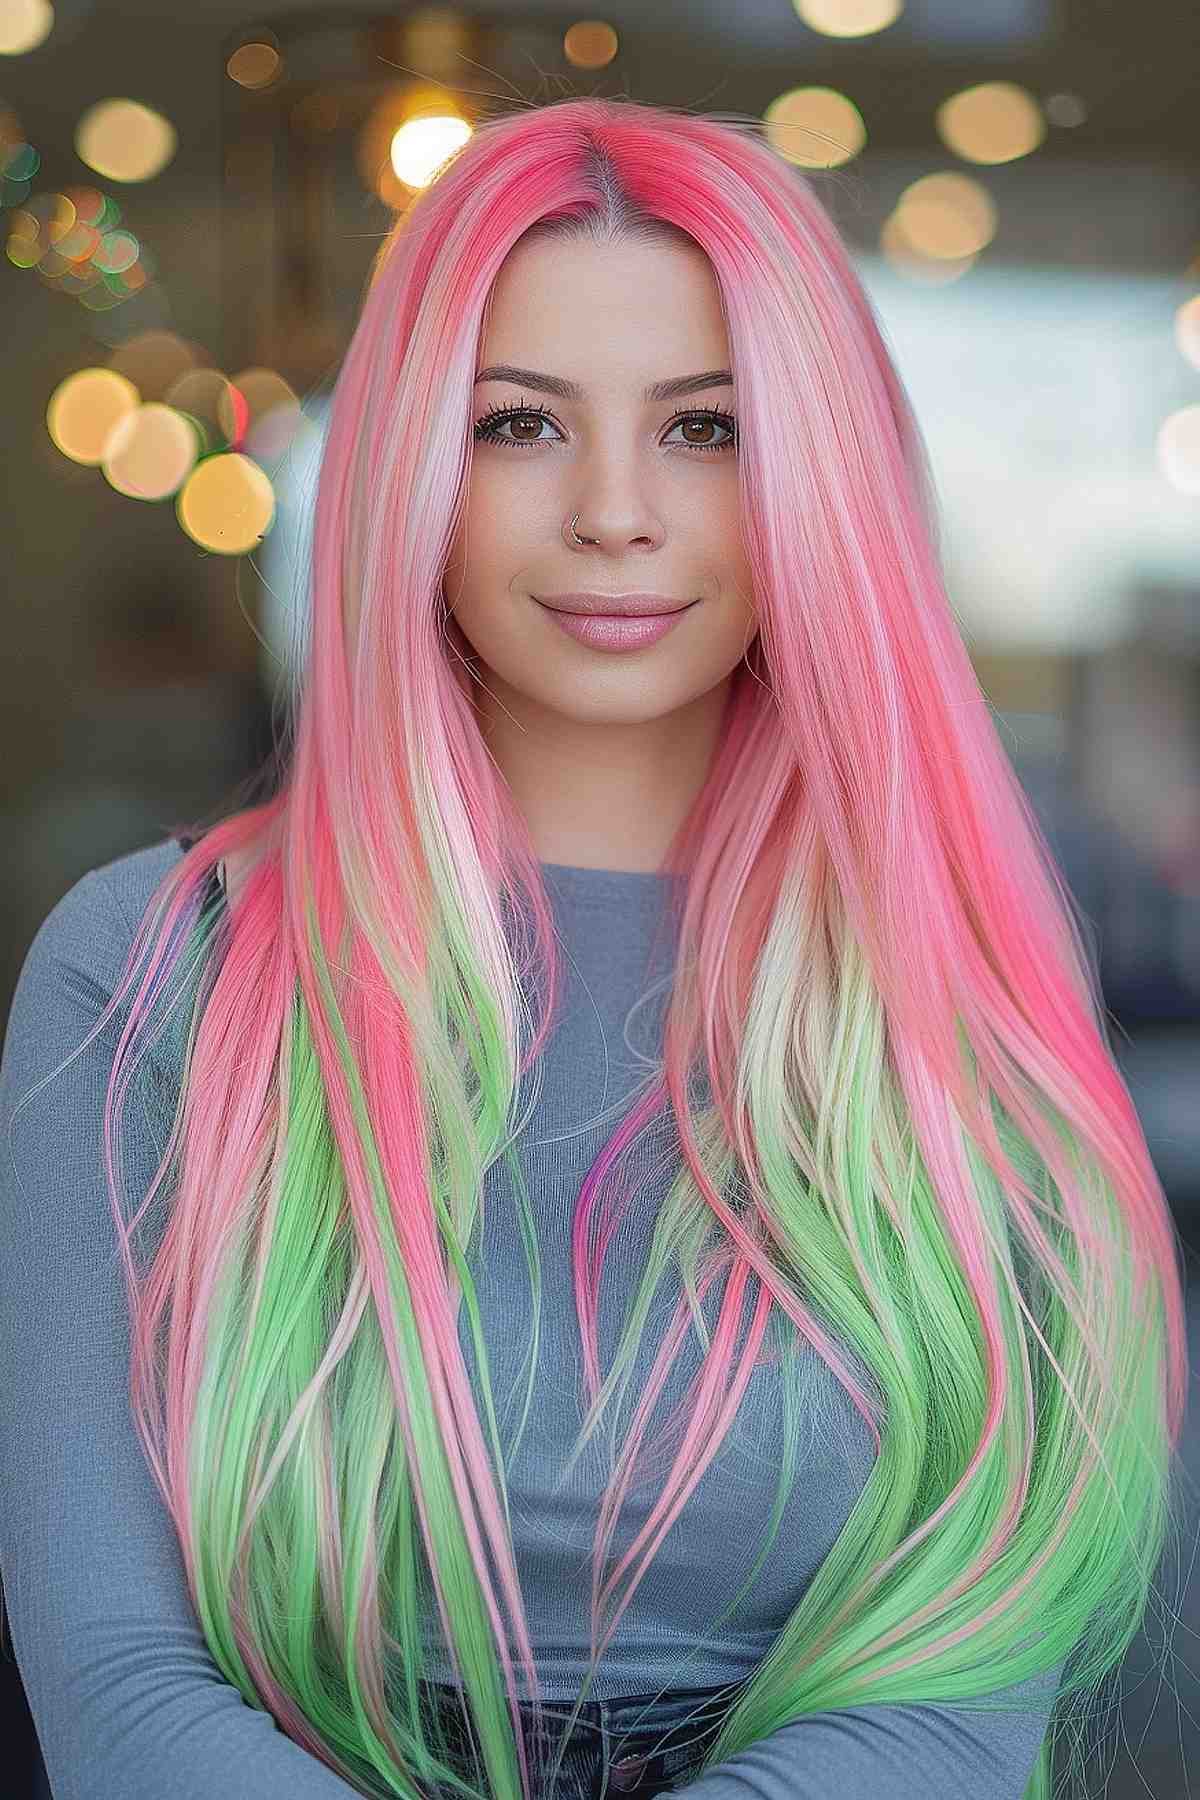 A young woman with long, straight hair featuring pink to green gradient hair extensions, creating a radiant watermelon effect.